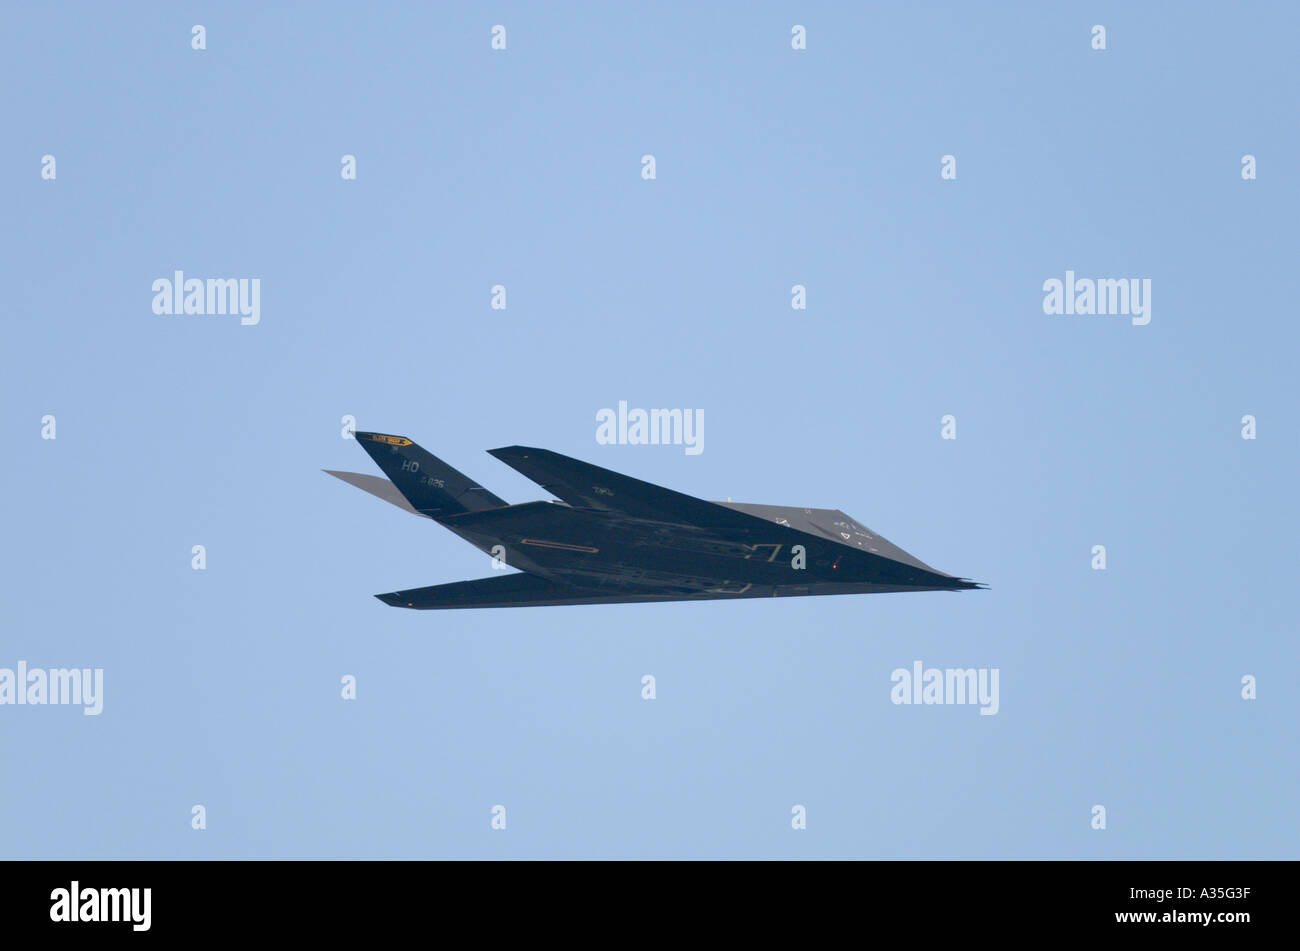 United States Air Force F-117 stealth fighter demonstration Stock Photo